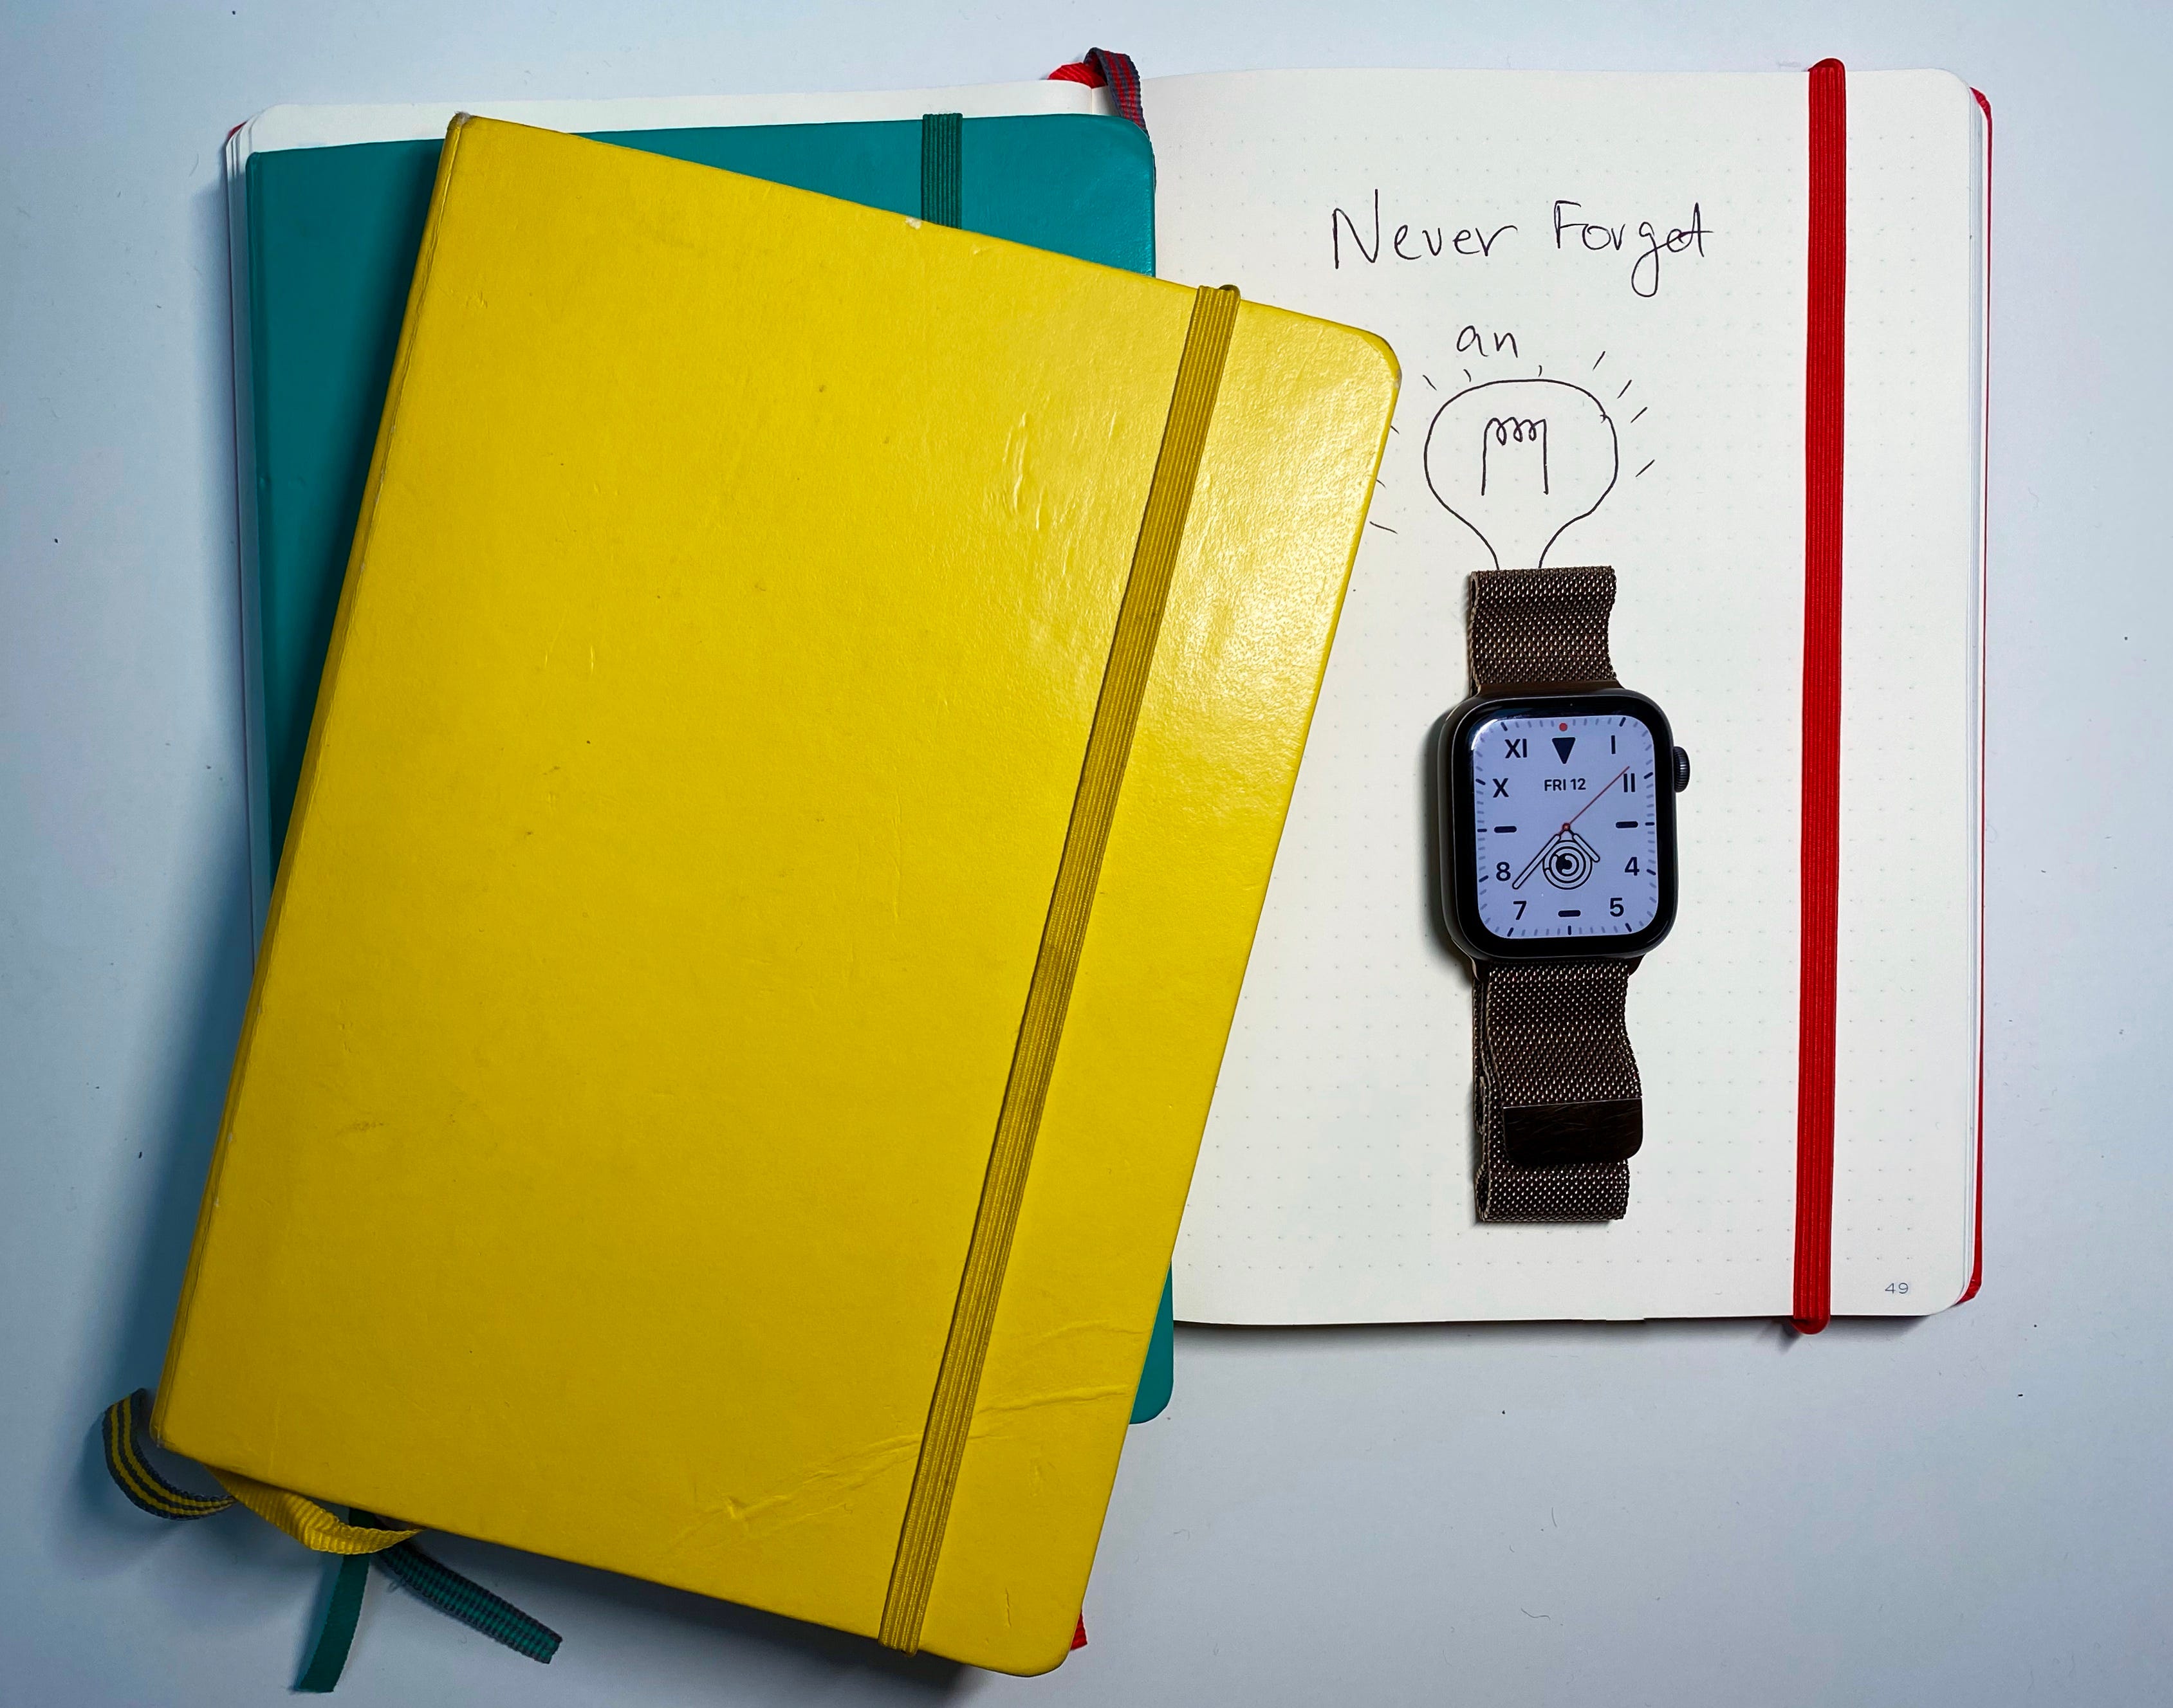 How to Get Notes App on Apple Watch - Write Notes on your Wrist